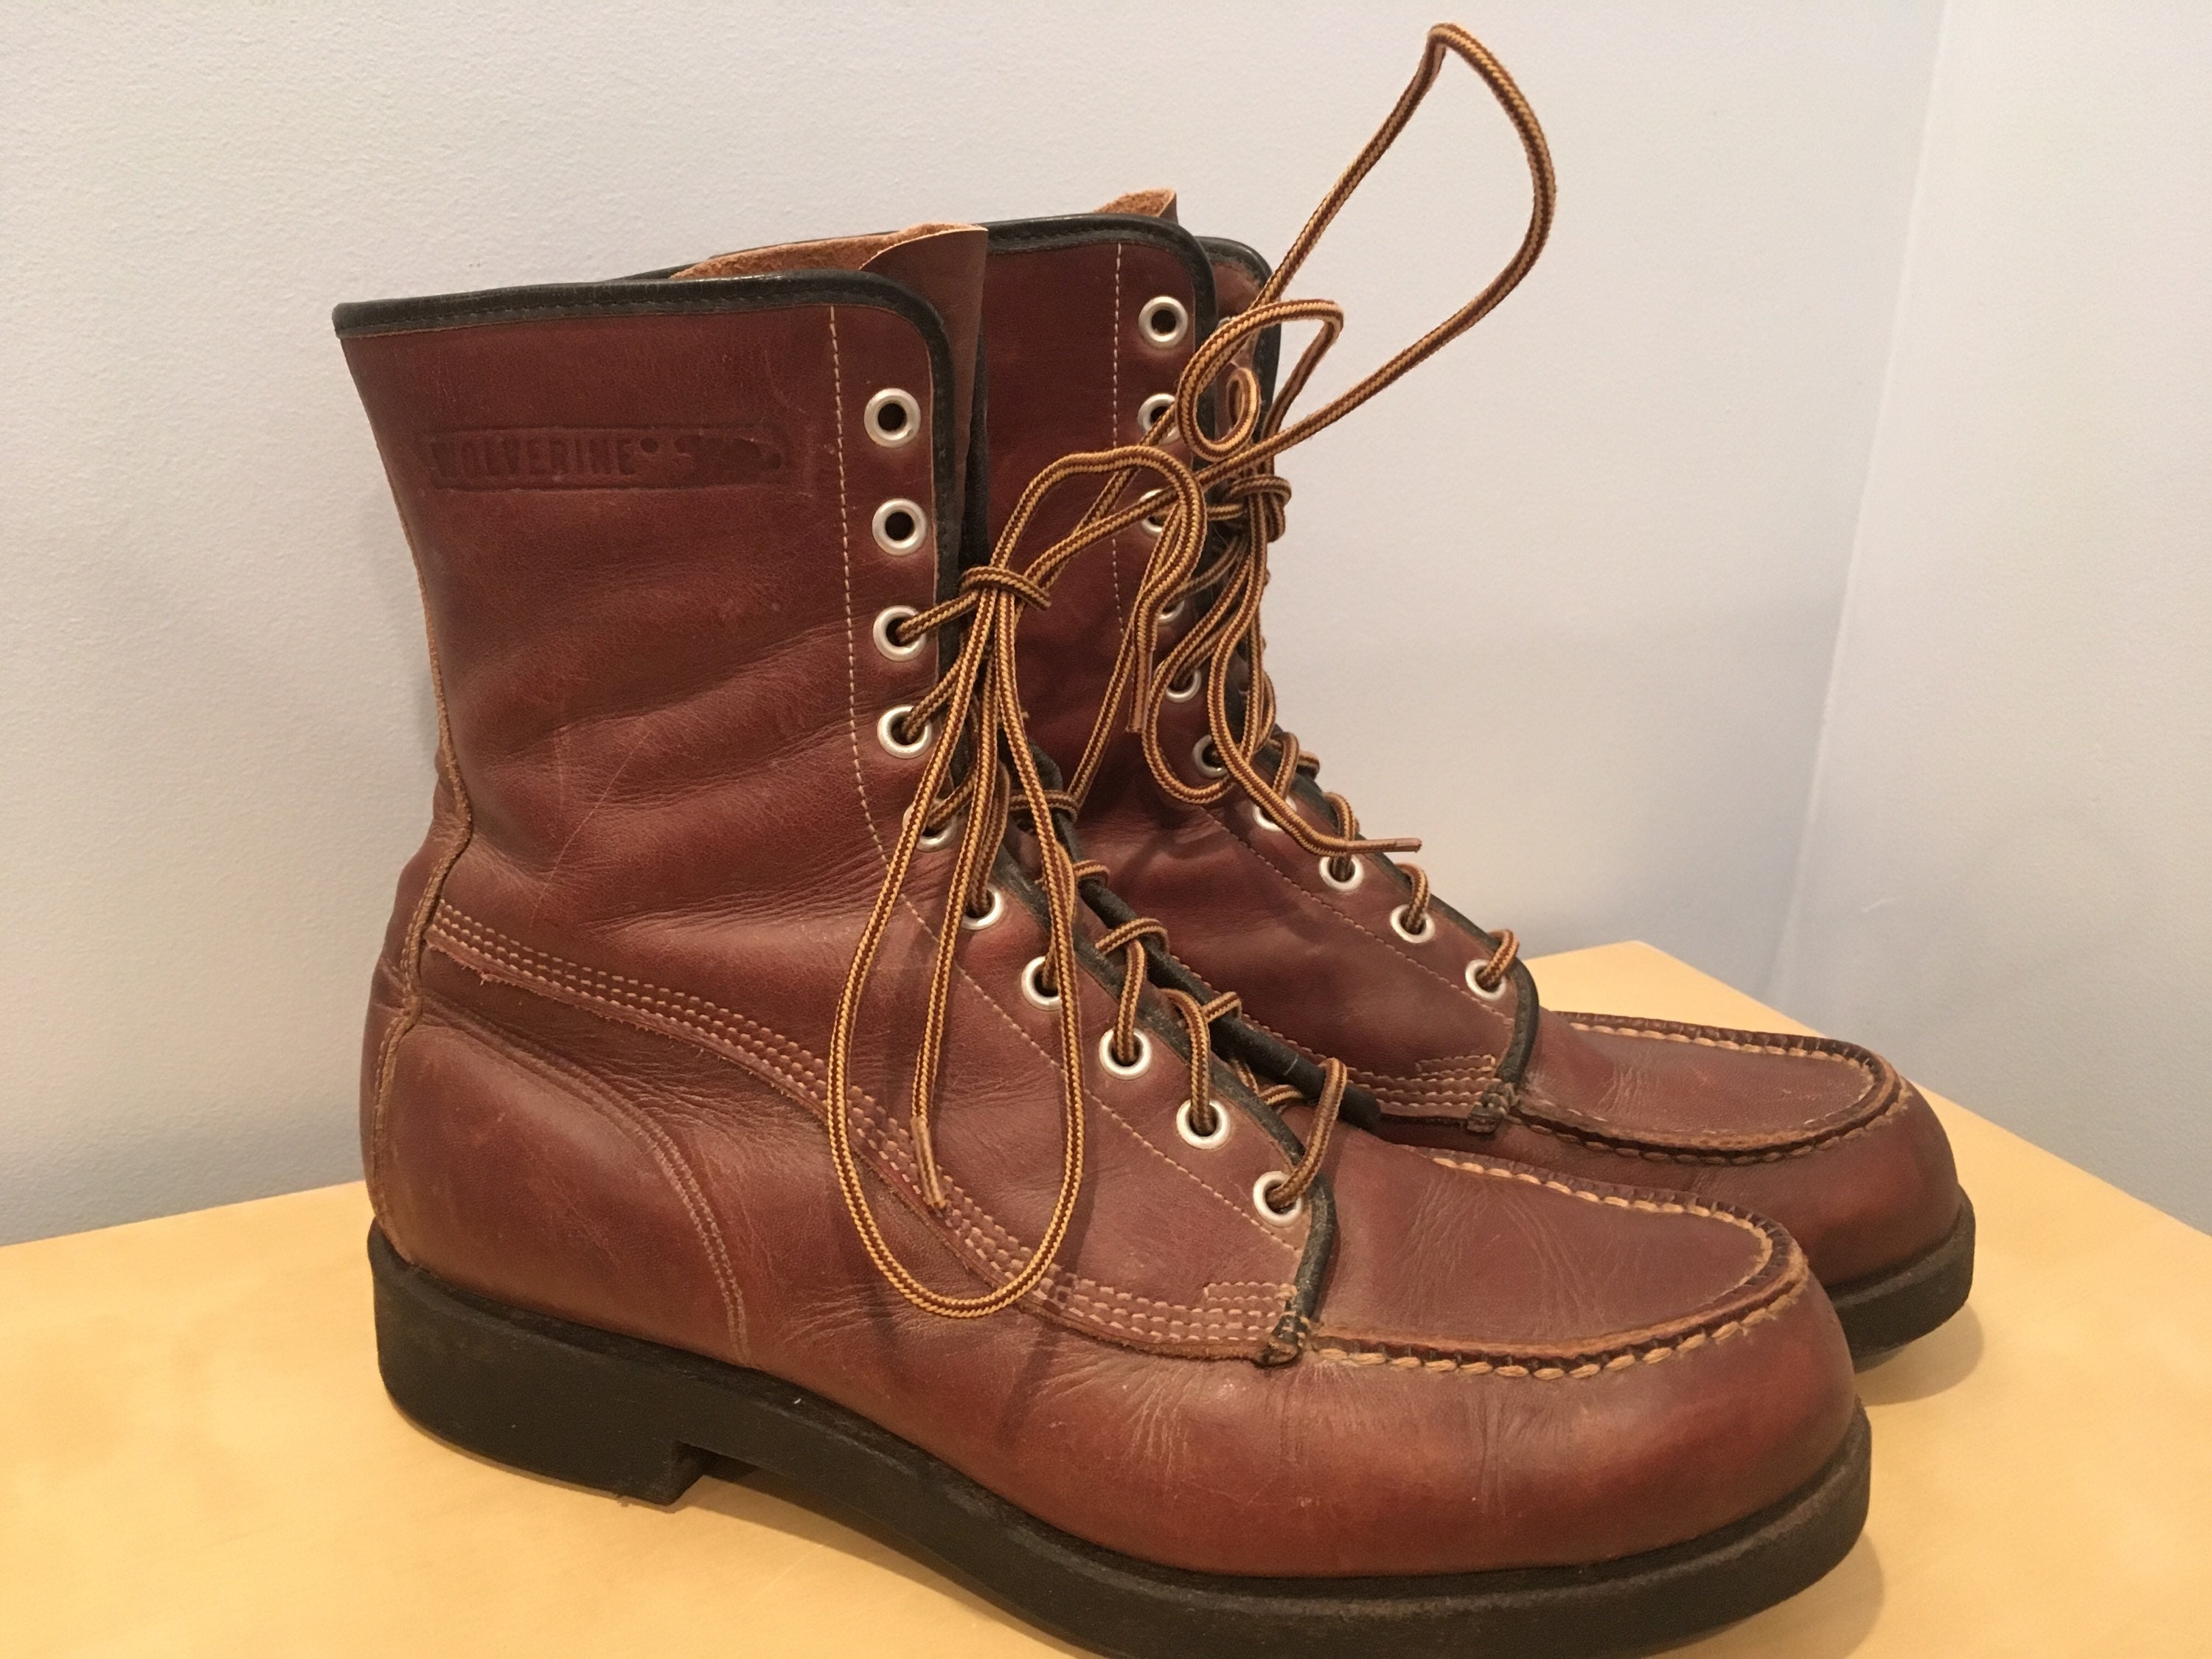 Vintage Wolverine Brand Lace-up Leather Work Boots Men's